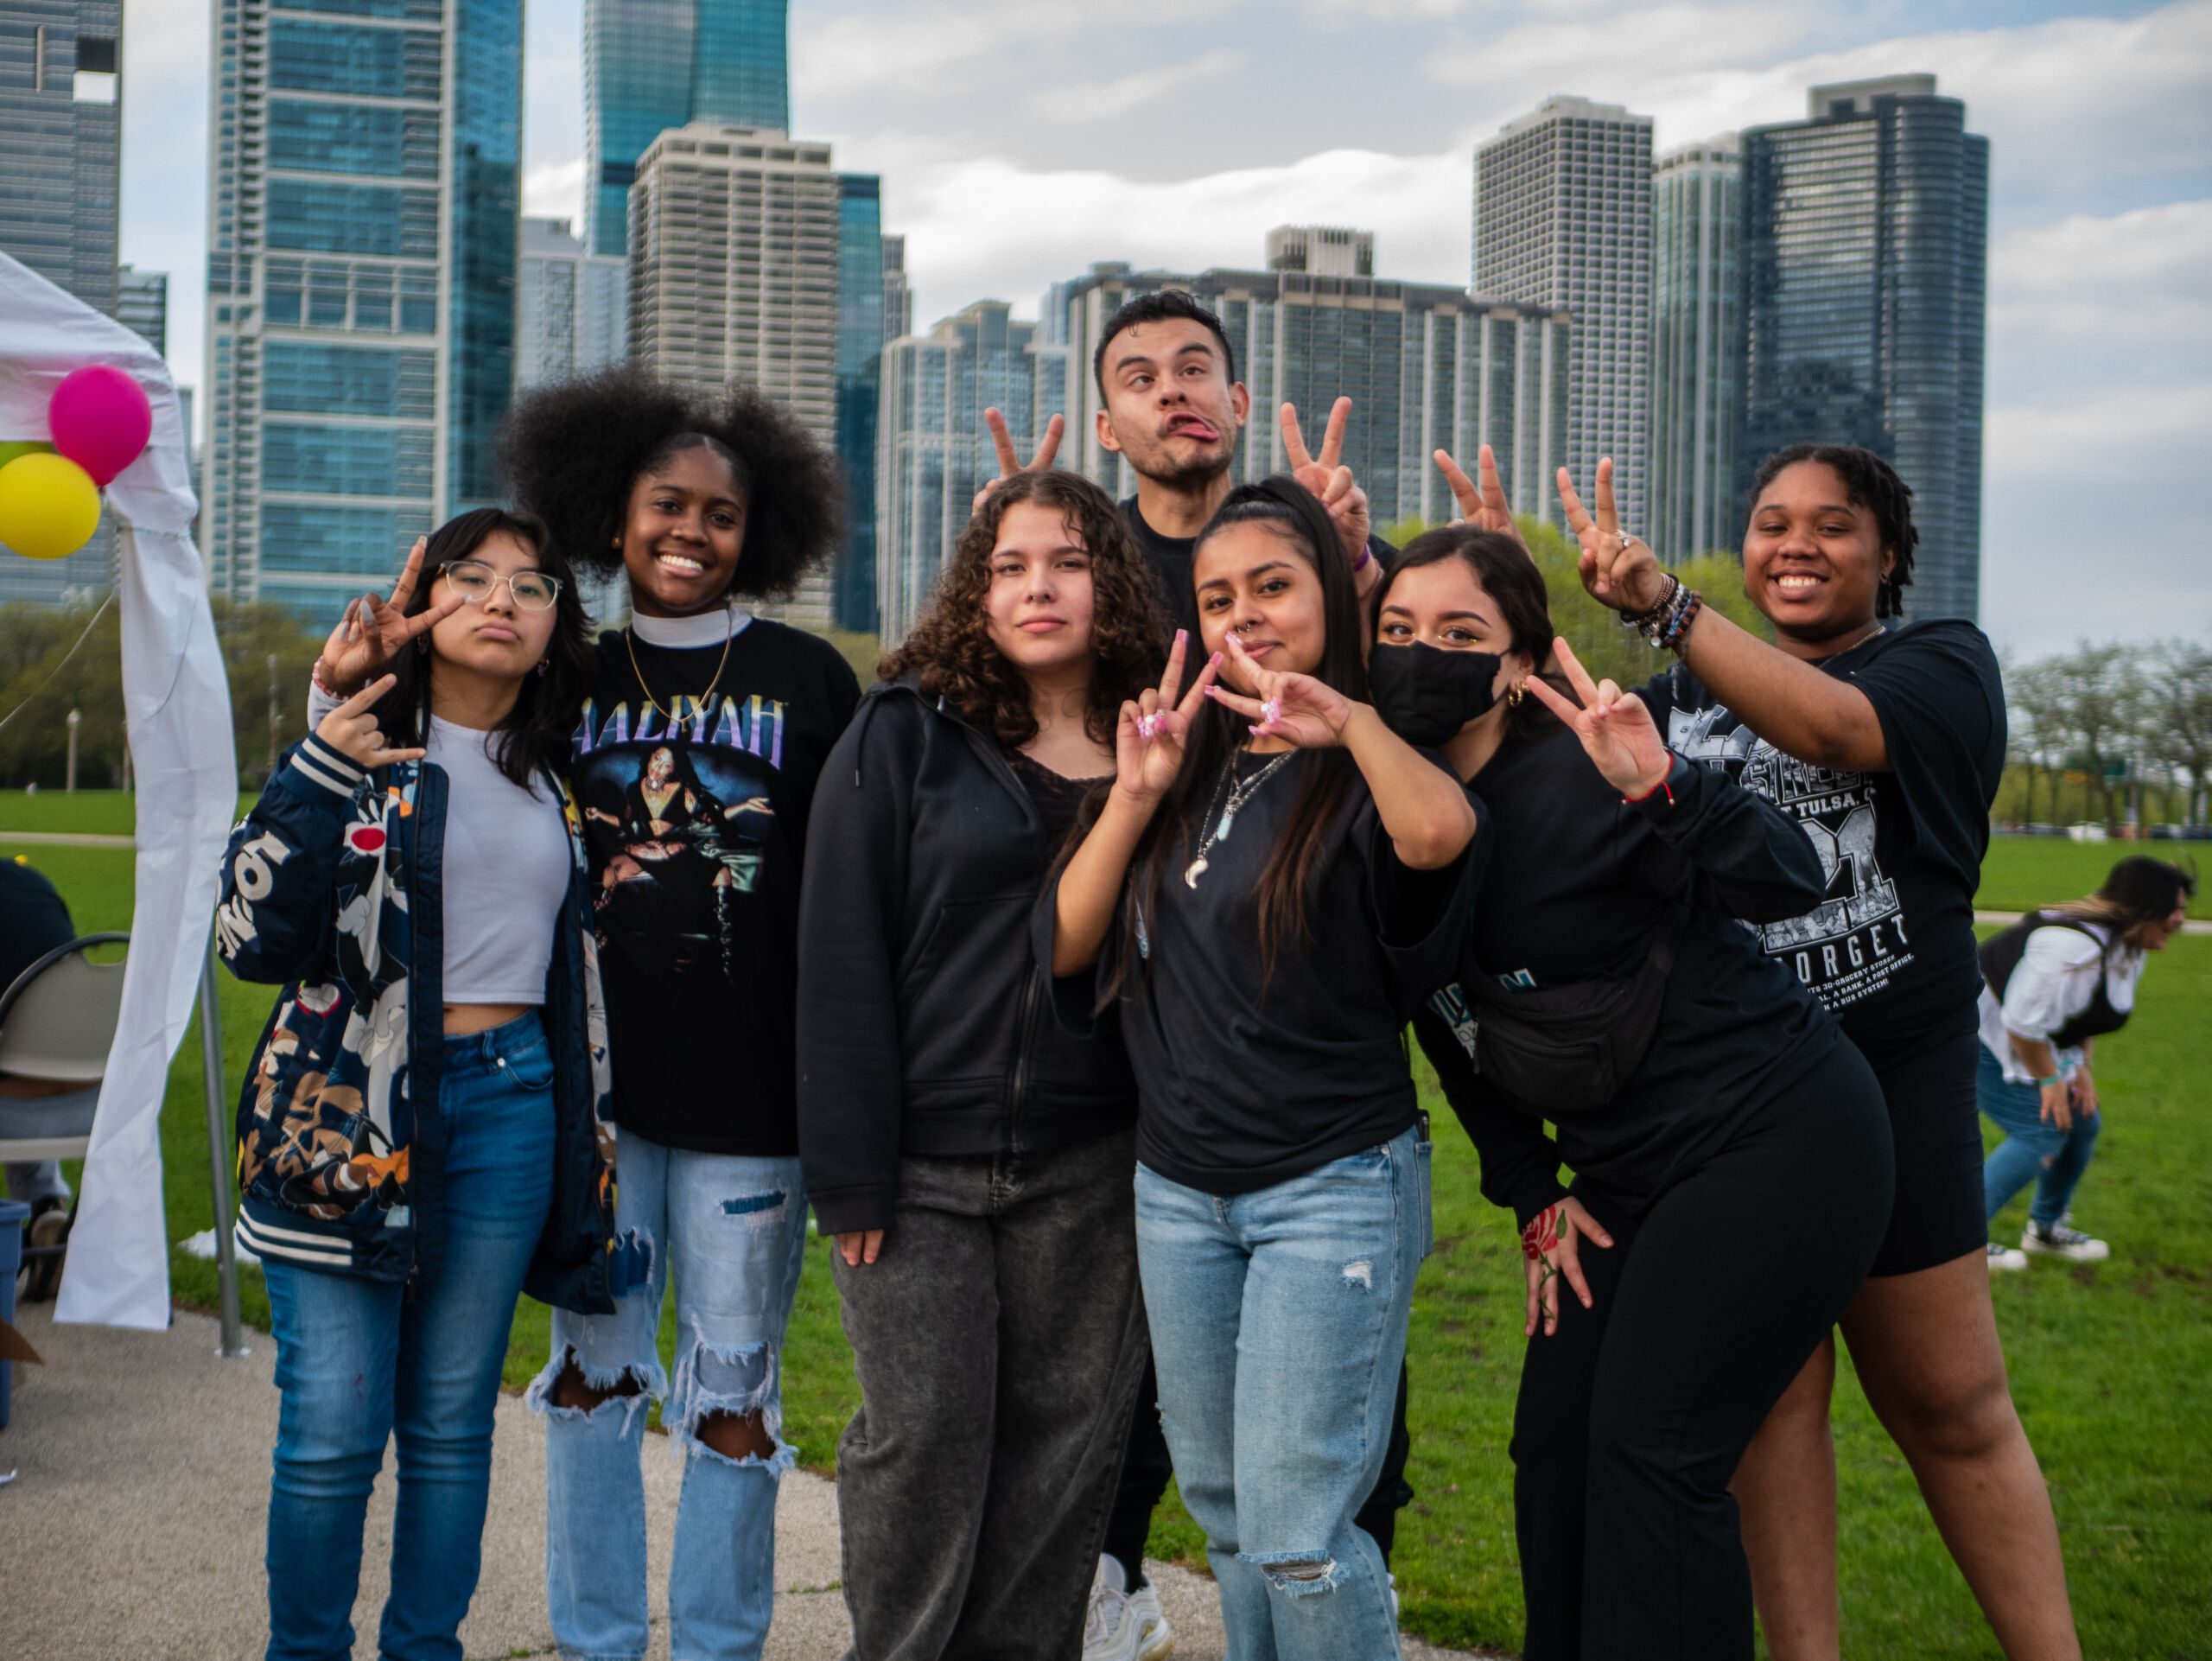 A group of students and others gather for a photo. Many are wearing black sweaters while others are wearing various types of clothing. They pose right in front of the Chicago skyline.